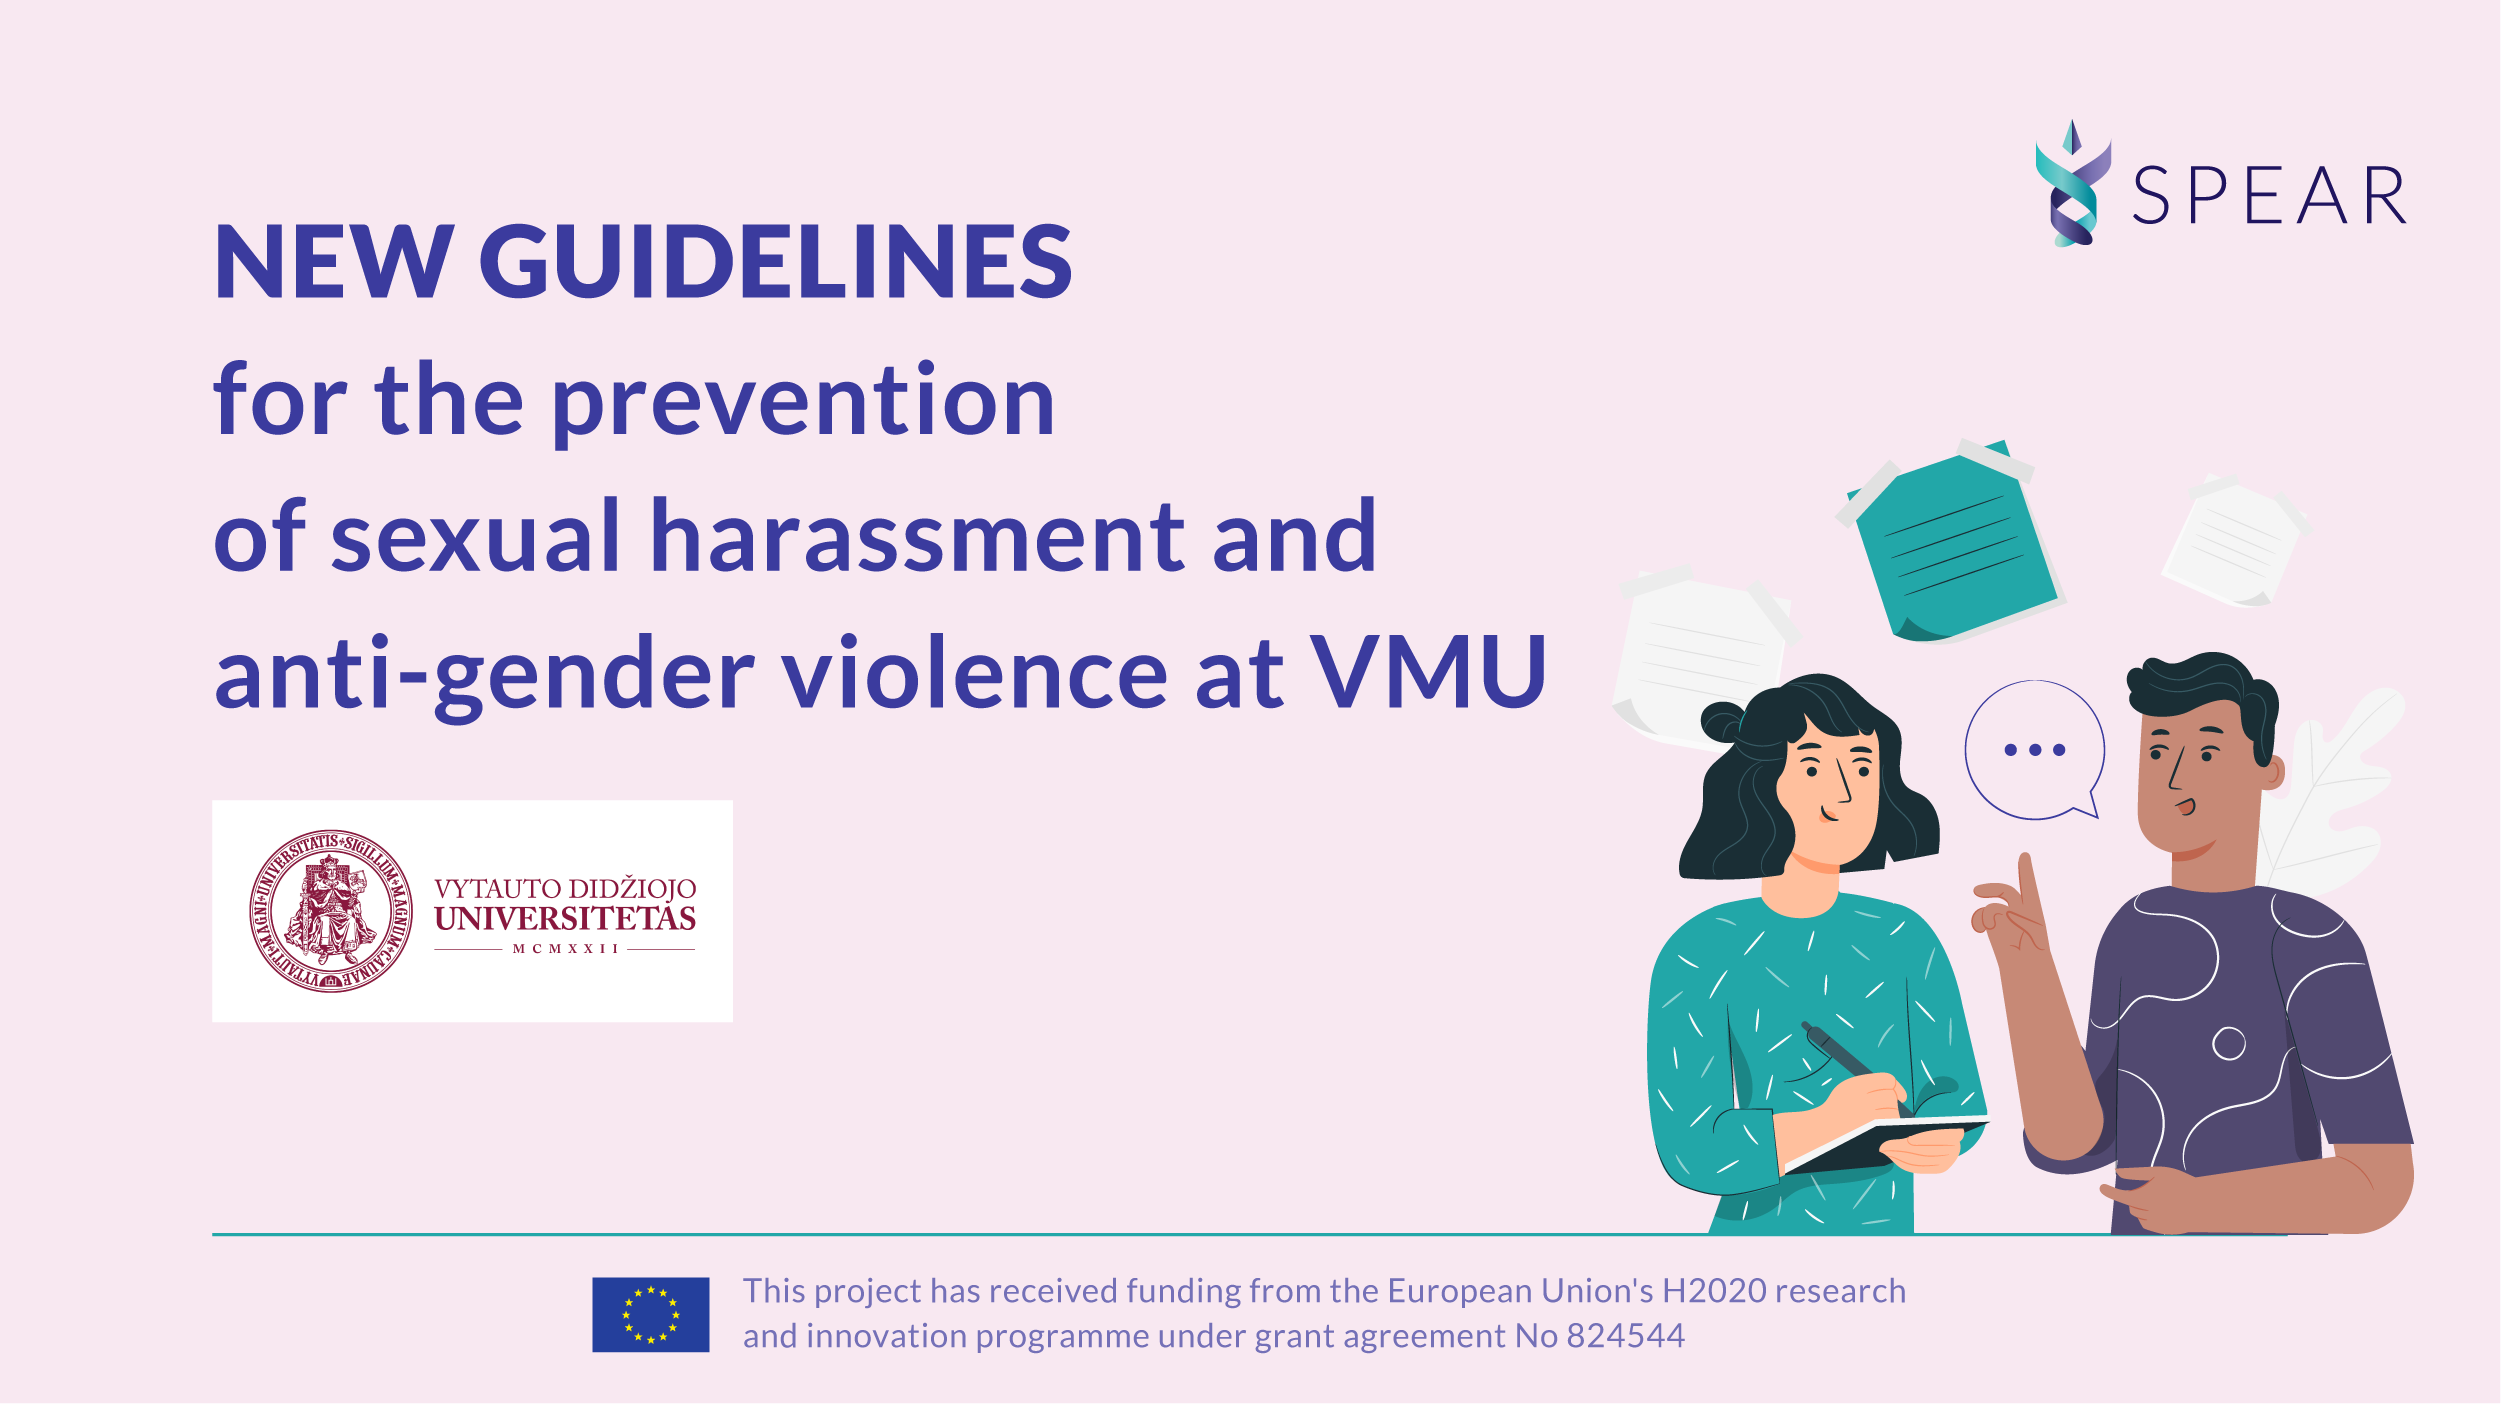 New guidelines for the prevention of sexual harassment and anti-gender violence at VMU